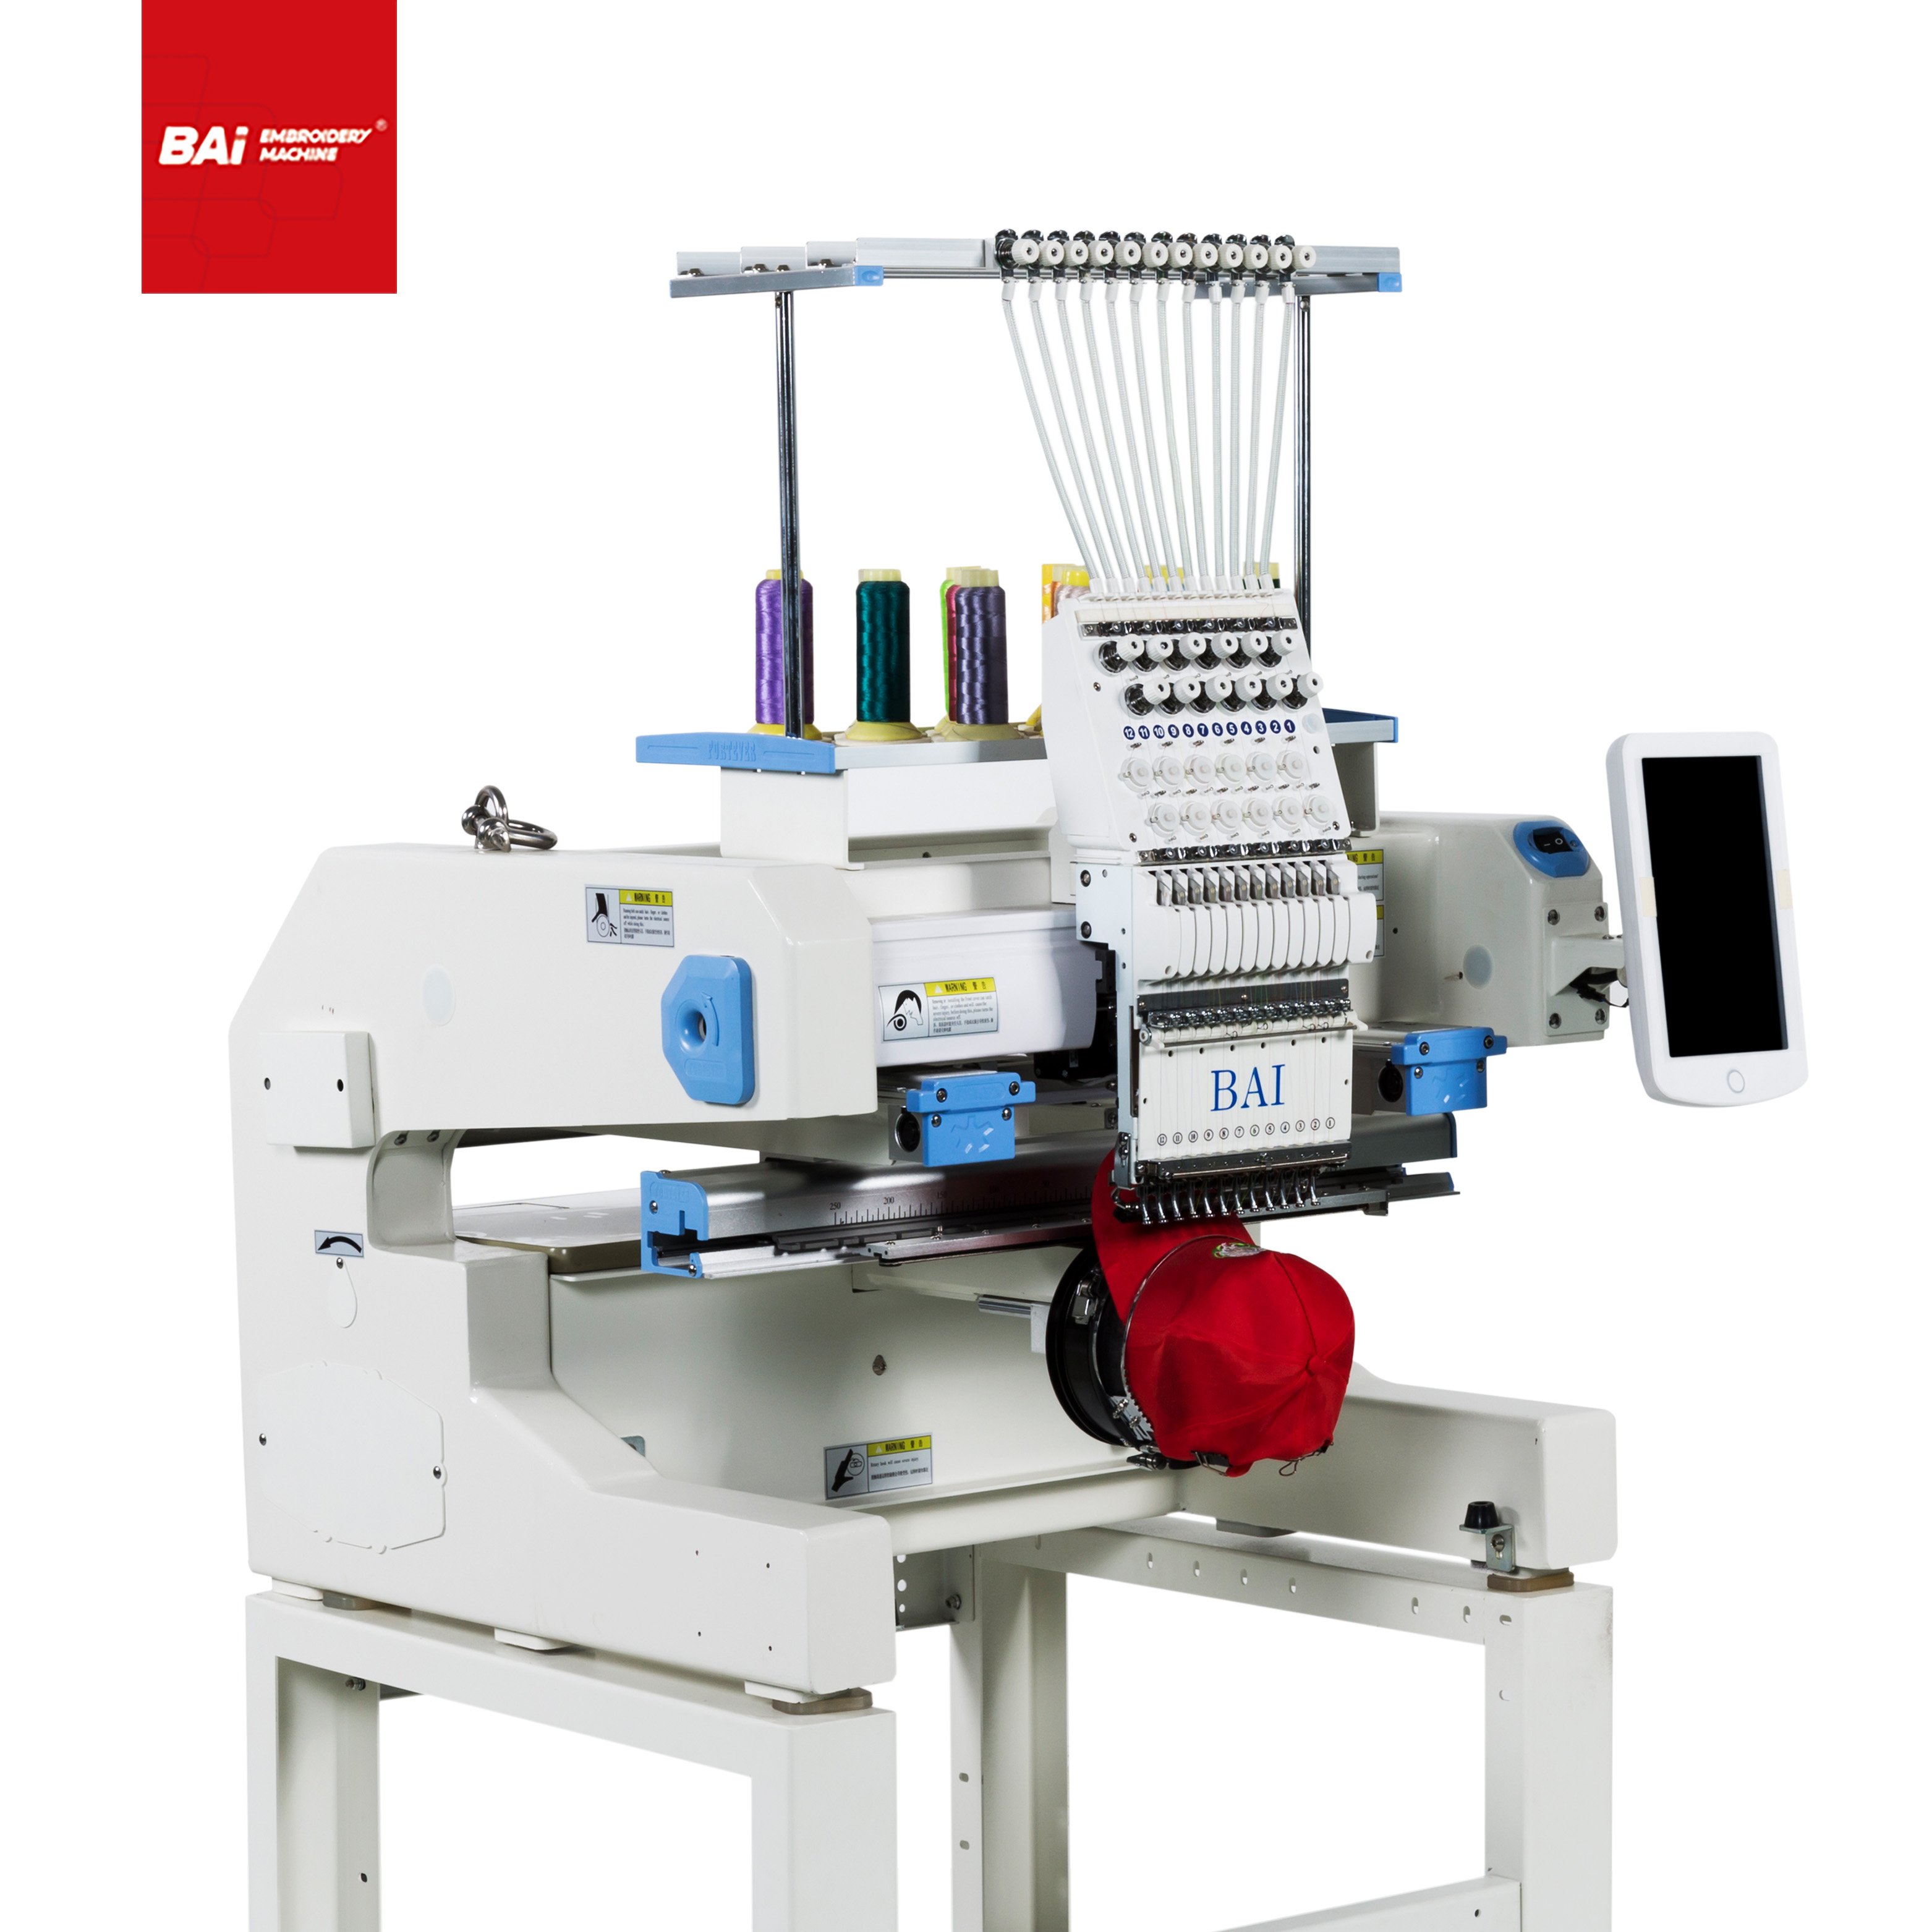 BAI High Speed Laser Embroidery Machine with Home Computerized